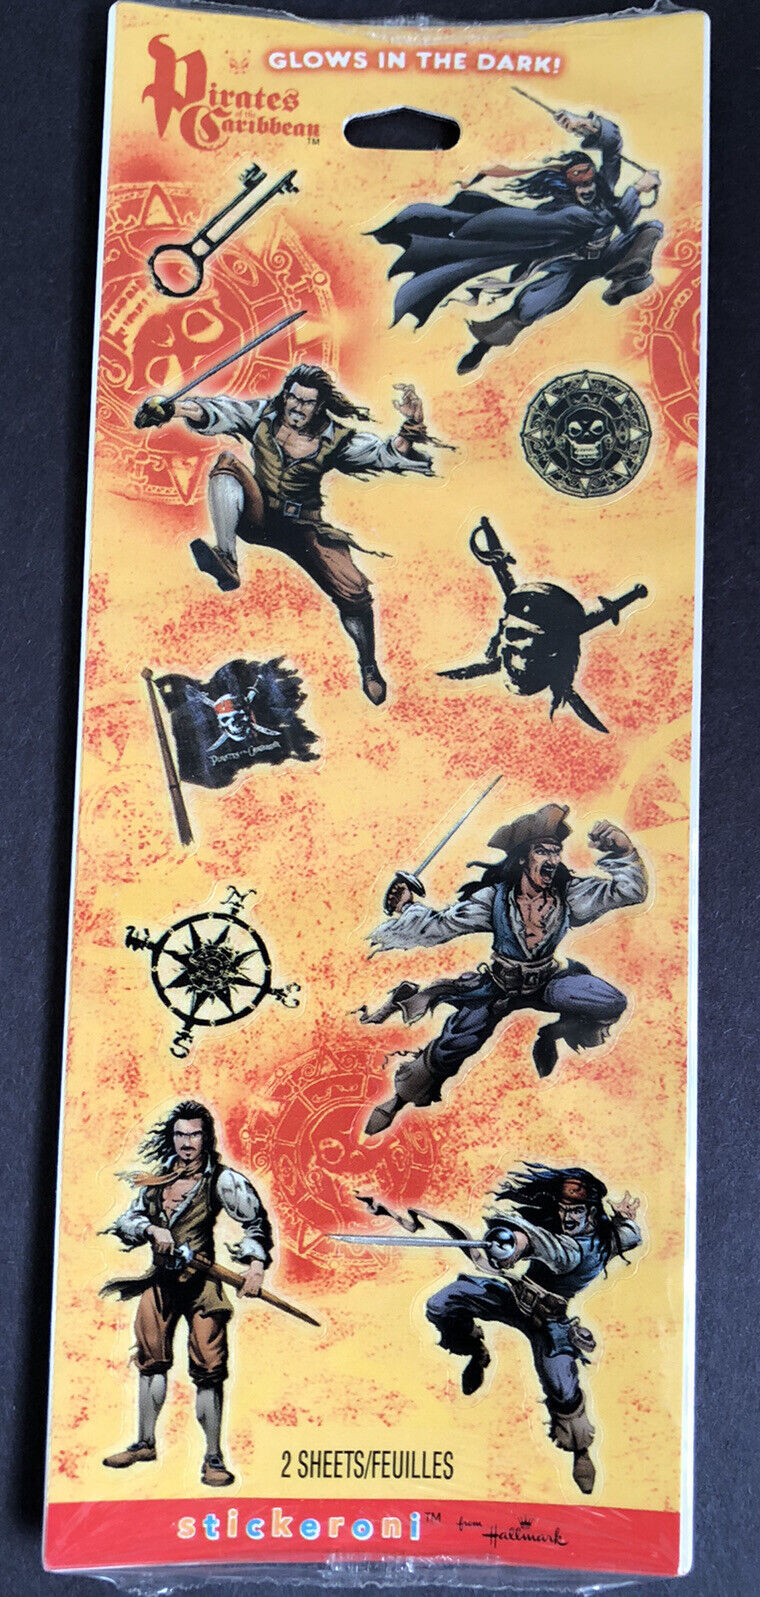 Disney's Pirates Of Caribbean Stickers Jack Sparrow - Glow In The Dark - Sealed